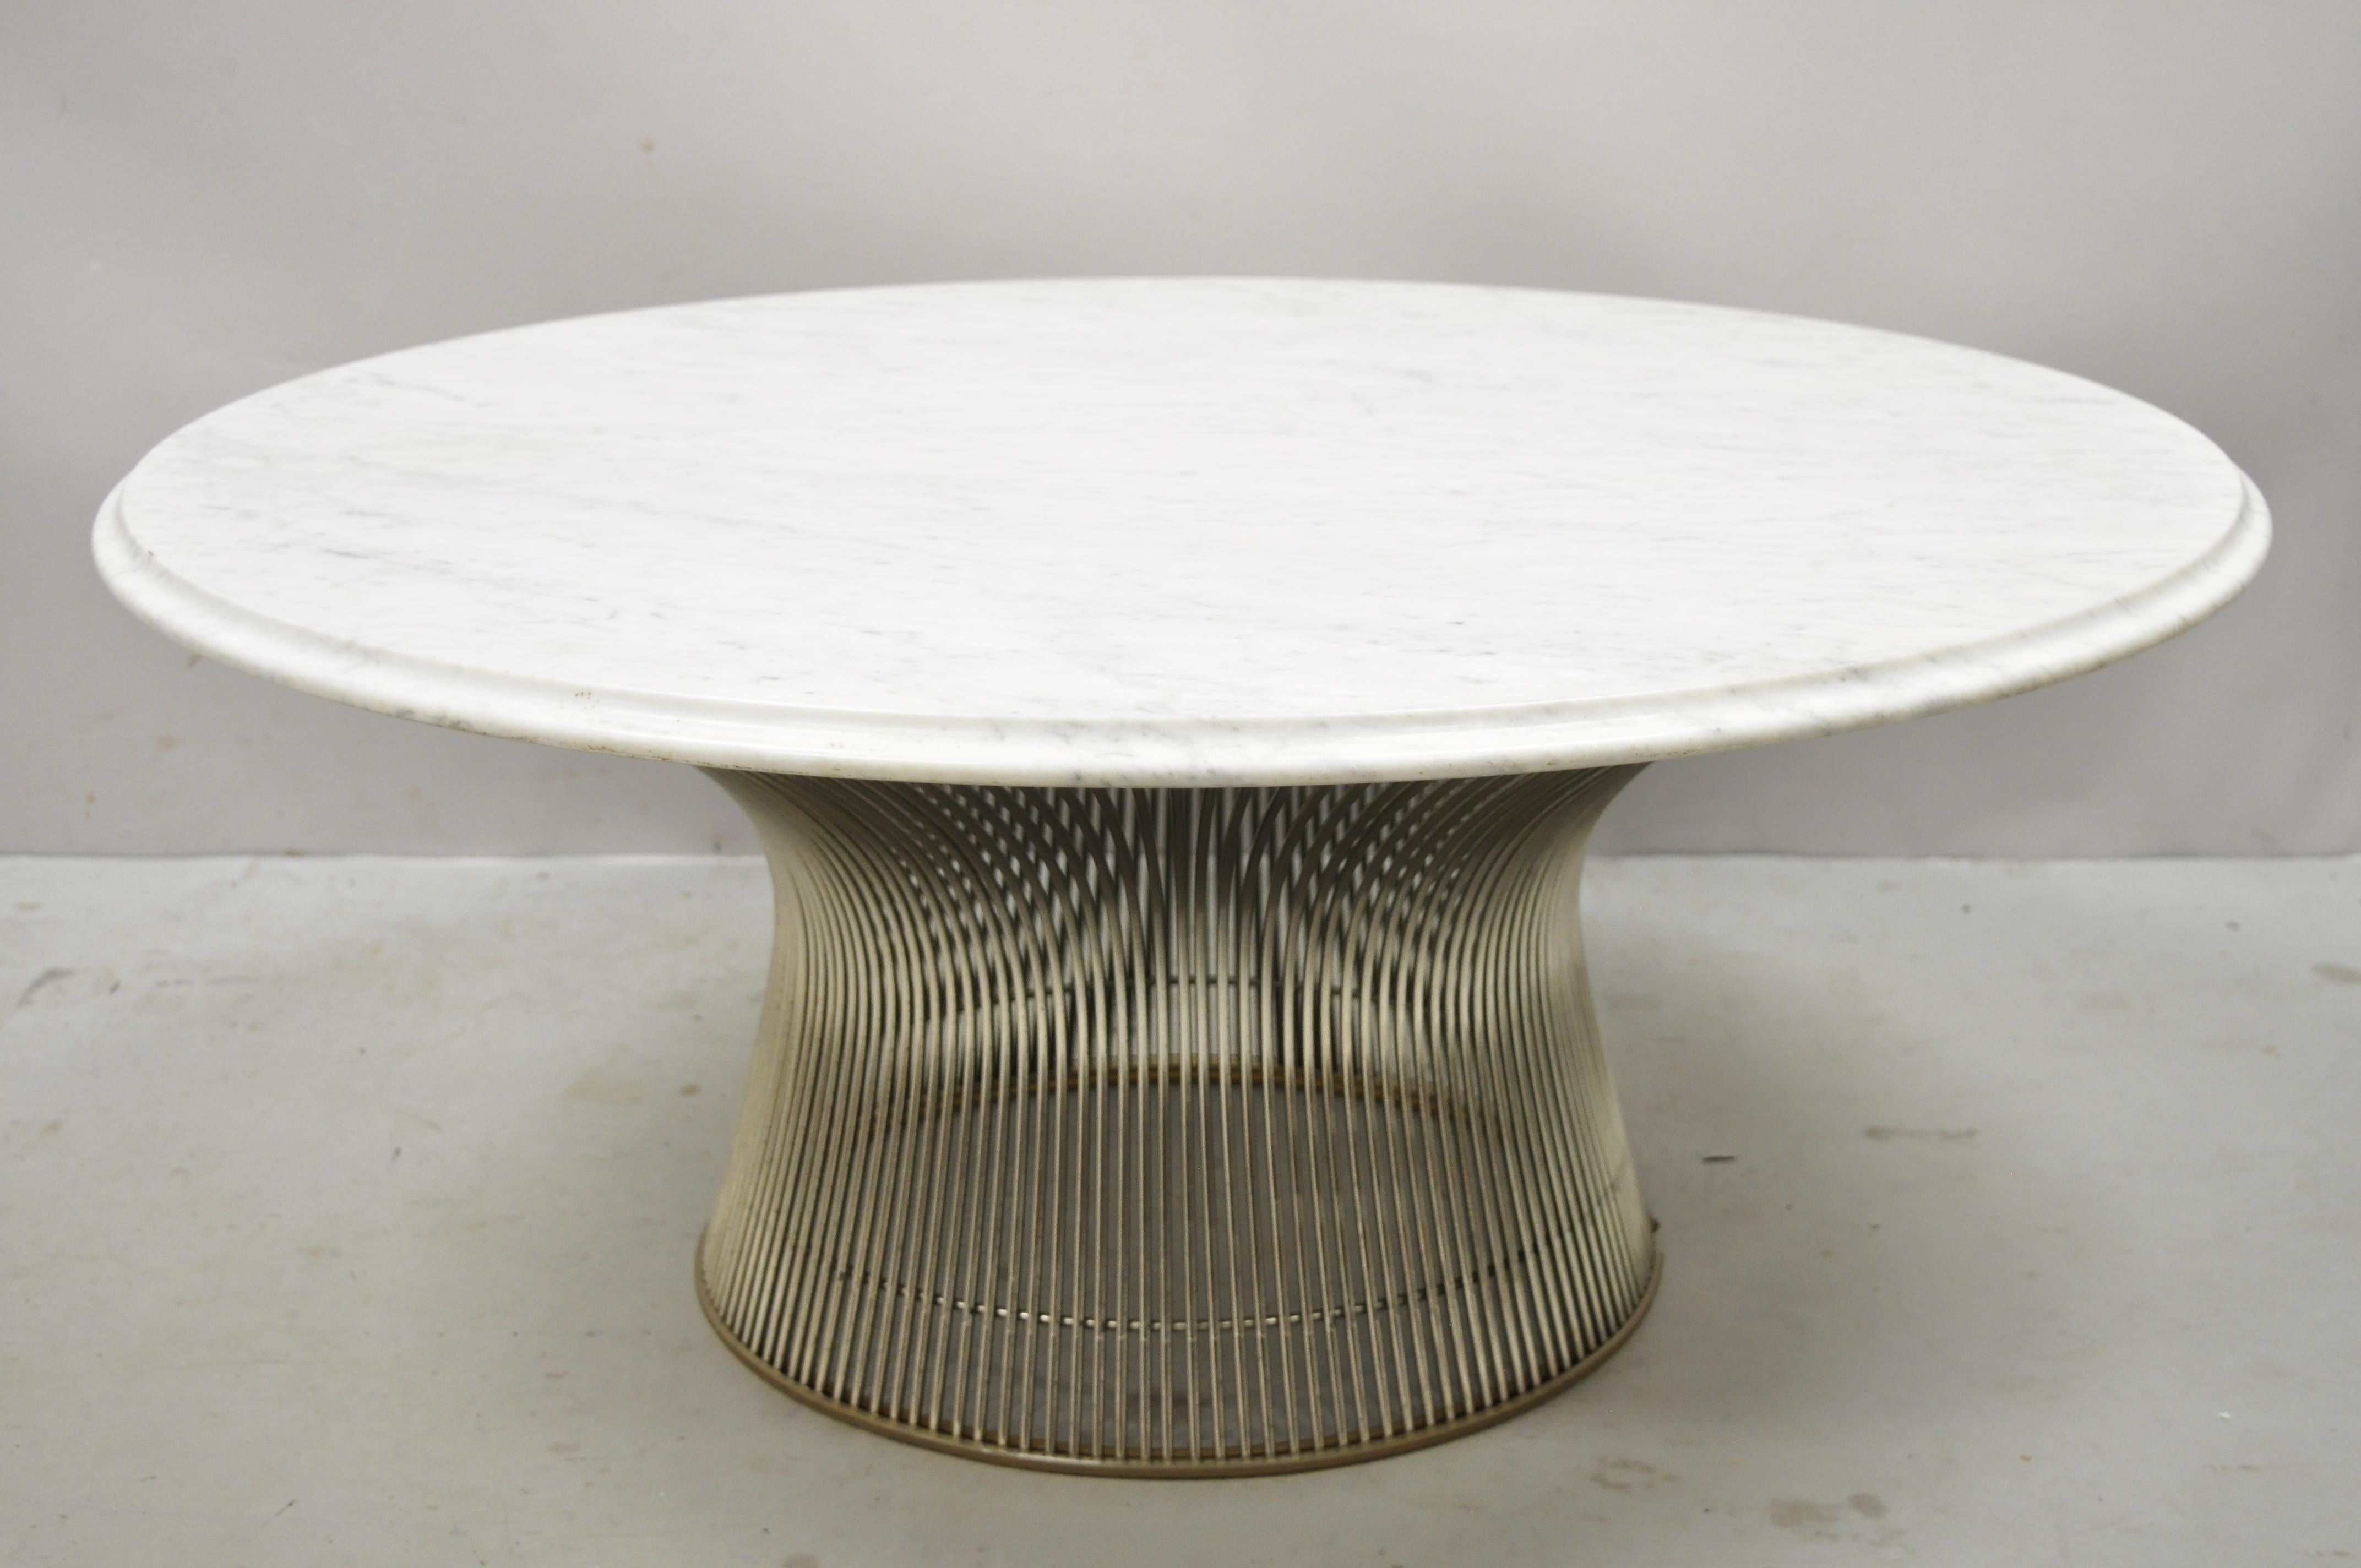 Vintage Warren Platner for Knoll chrome steel wire round marble top coffee table. Item features round white marble top with gray veins and beveled edge, steel wire round pedestal base, very nice vintage item, clean modernist lines, quality American